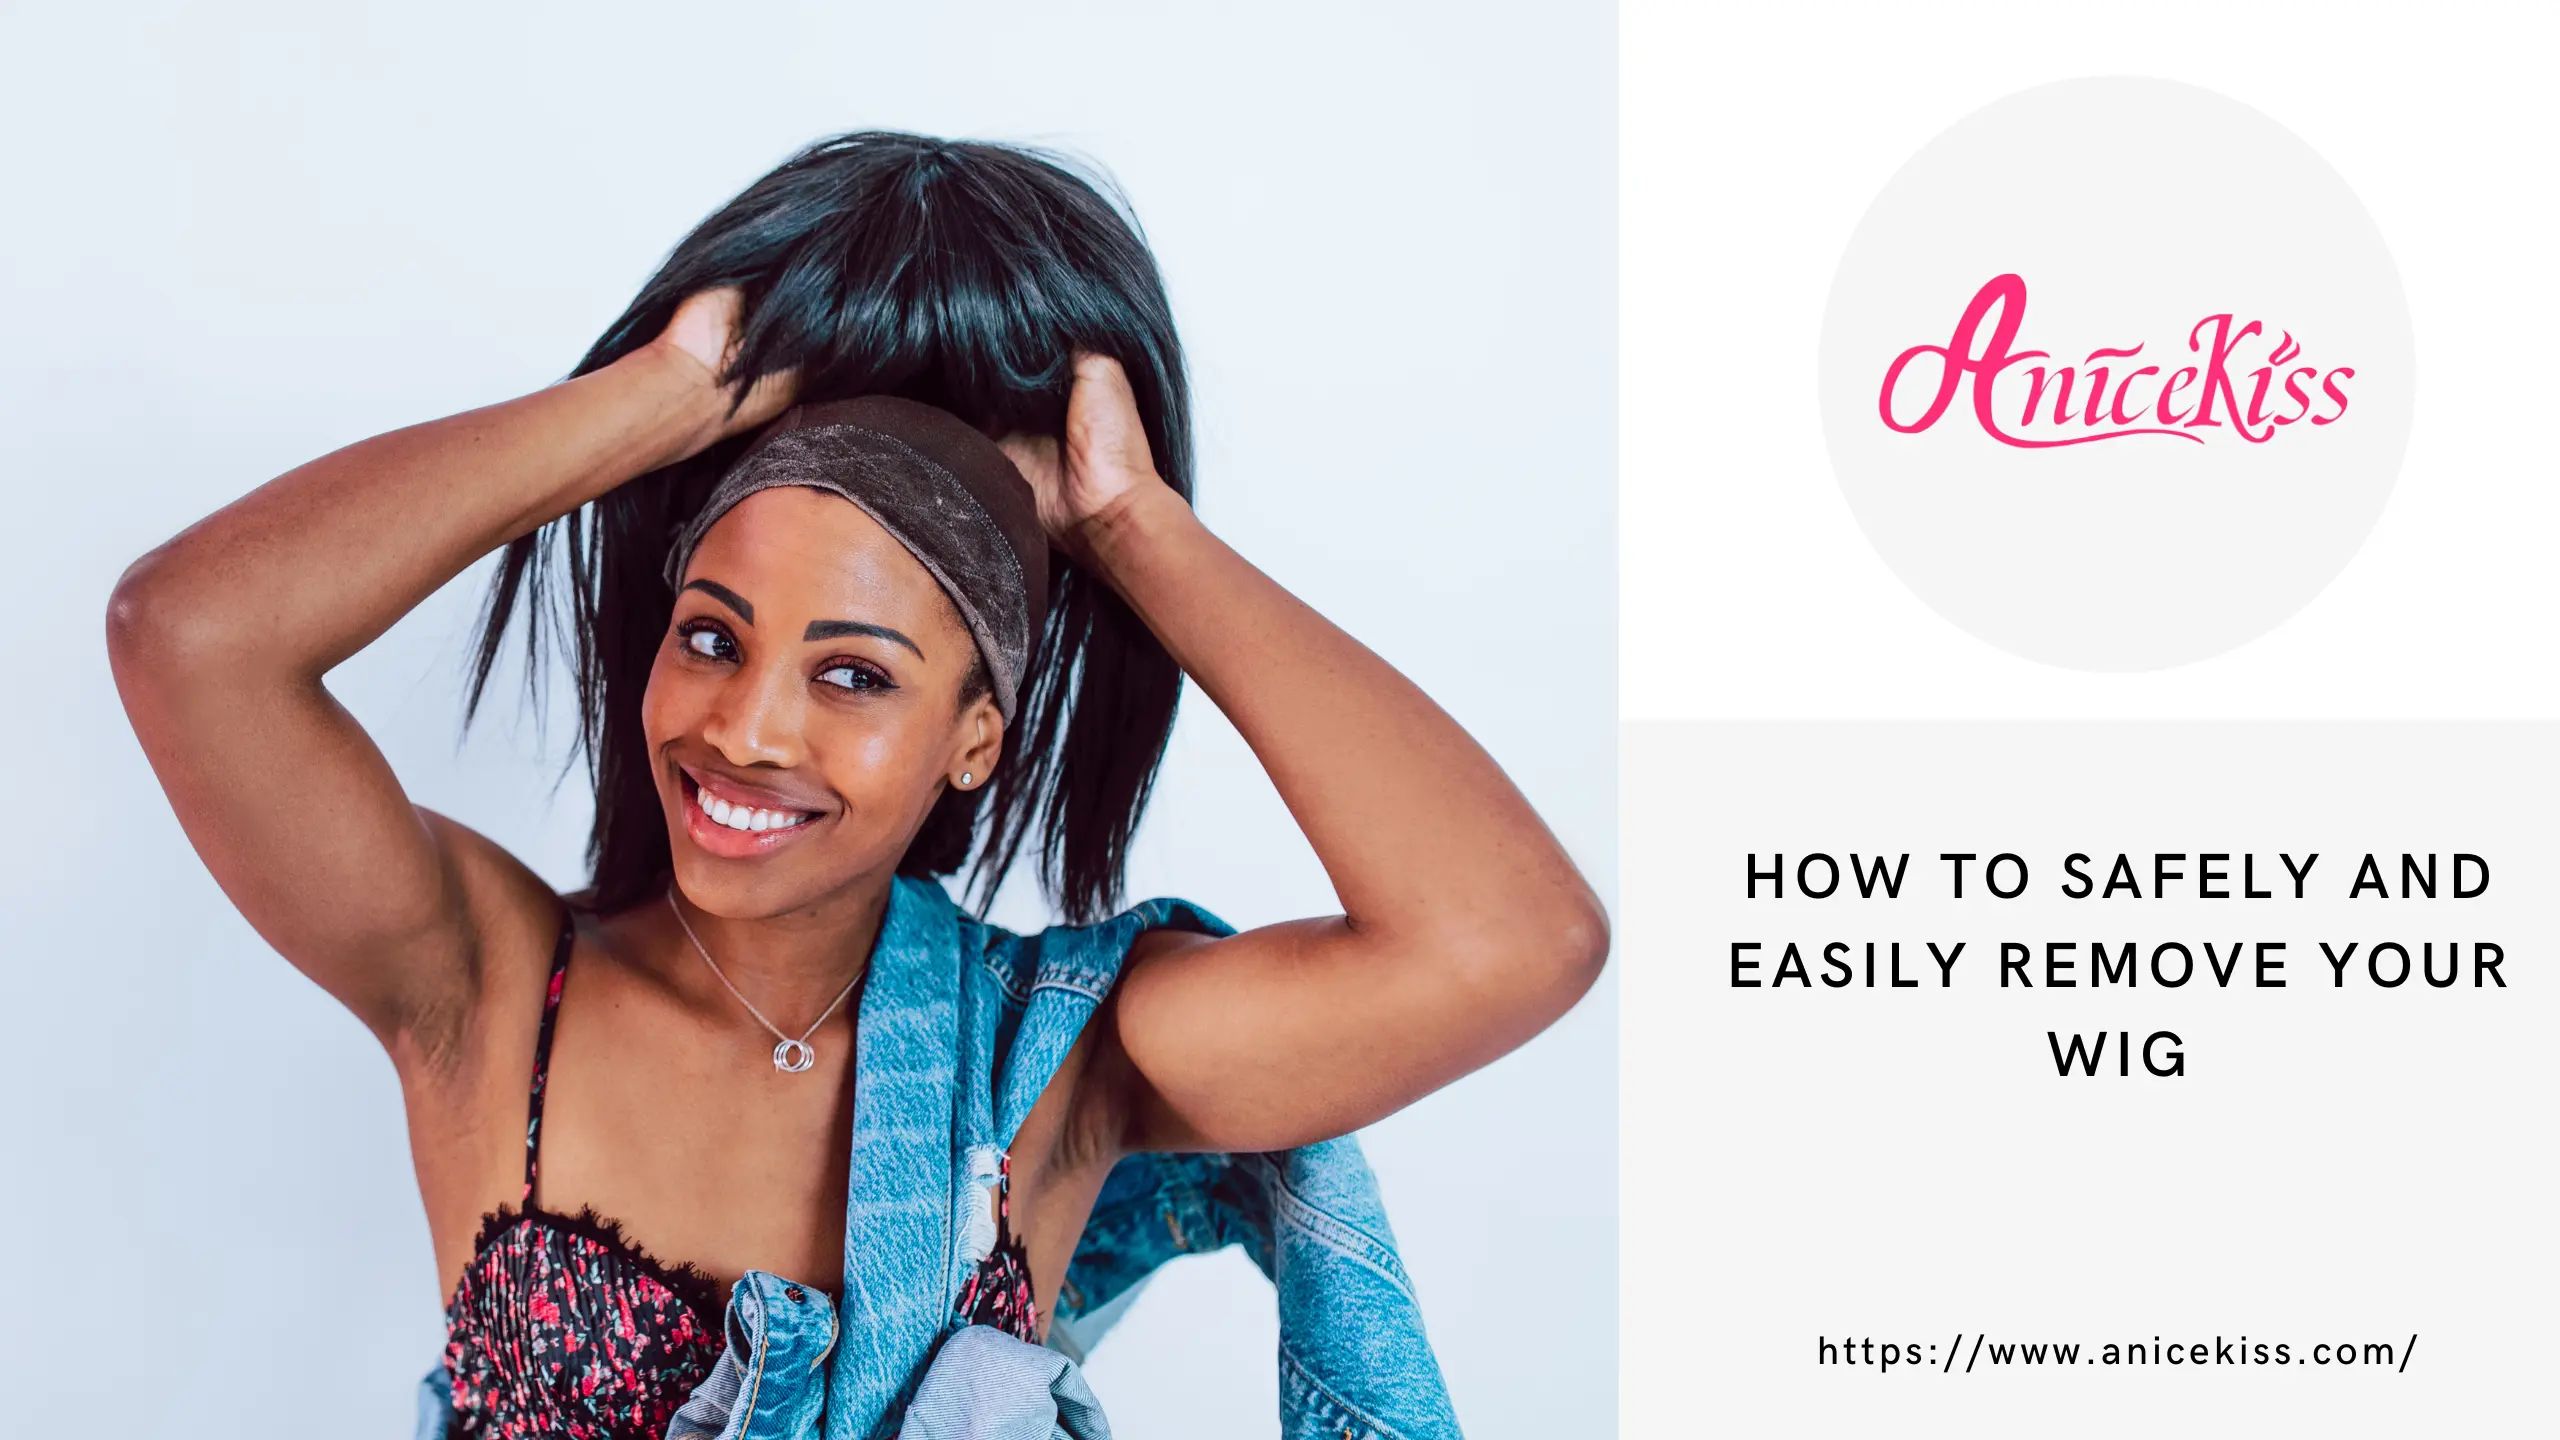 How to safely and easily remove your wig